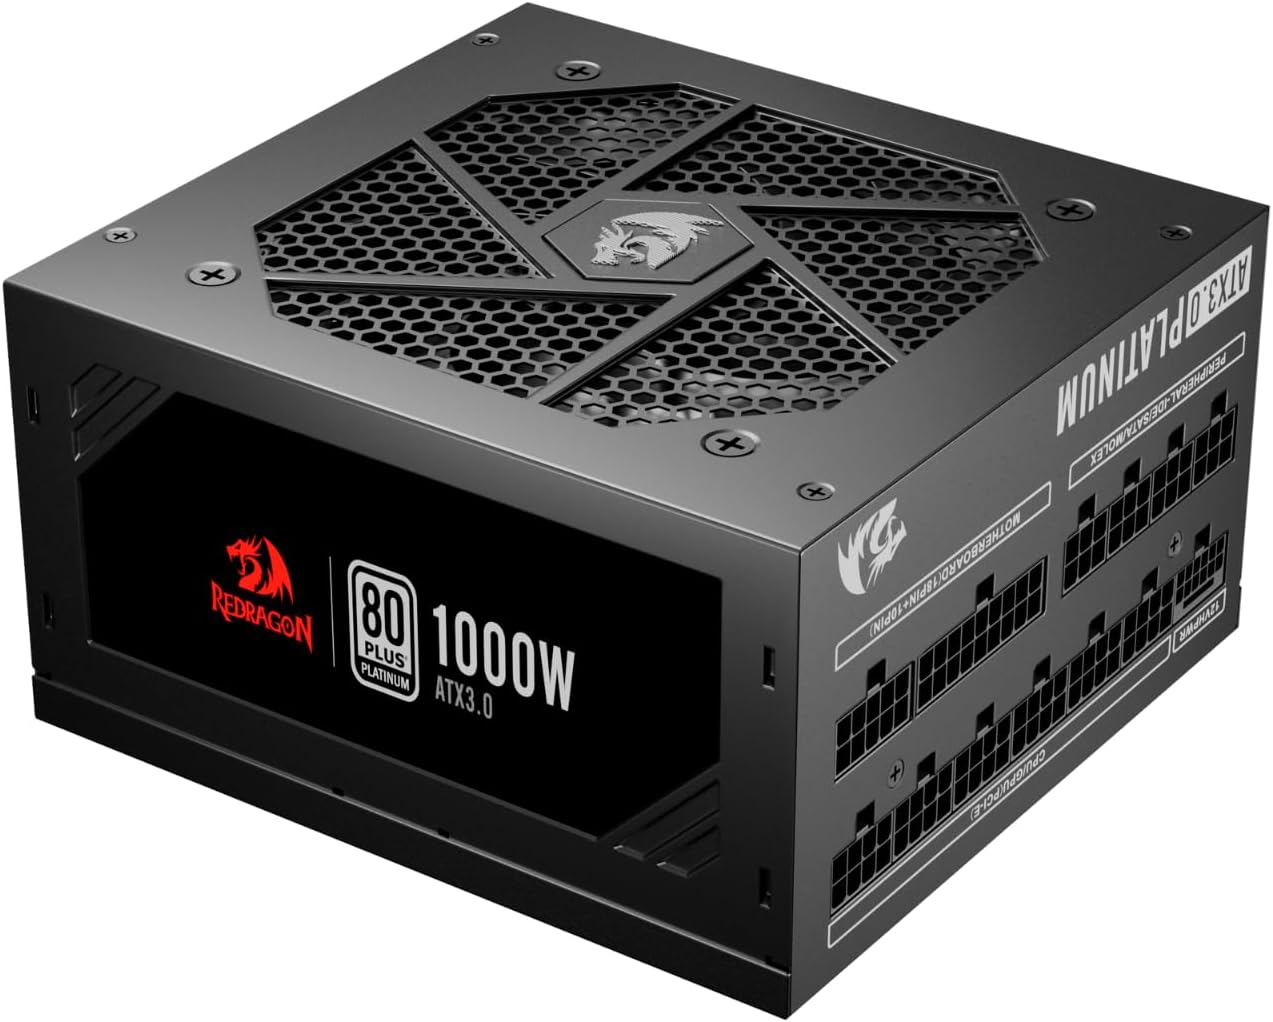 Redragon PS017 80+ Platium 1000 Watt ATX Fully Modular Power Supply, 80 Plus Certified, 100% Japanese Capacitors & Low Noise Smart-ECO 0 RPM Fan, Full Mod Cables w/12VHPWR Cable, Black